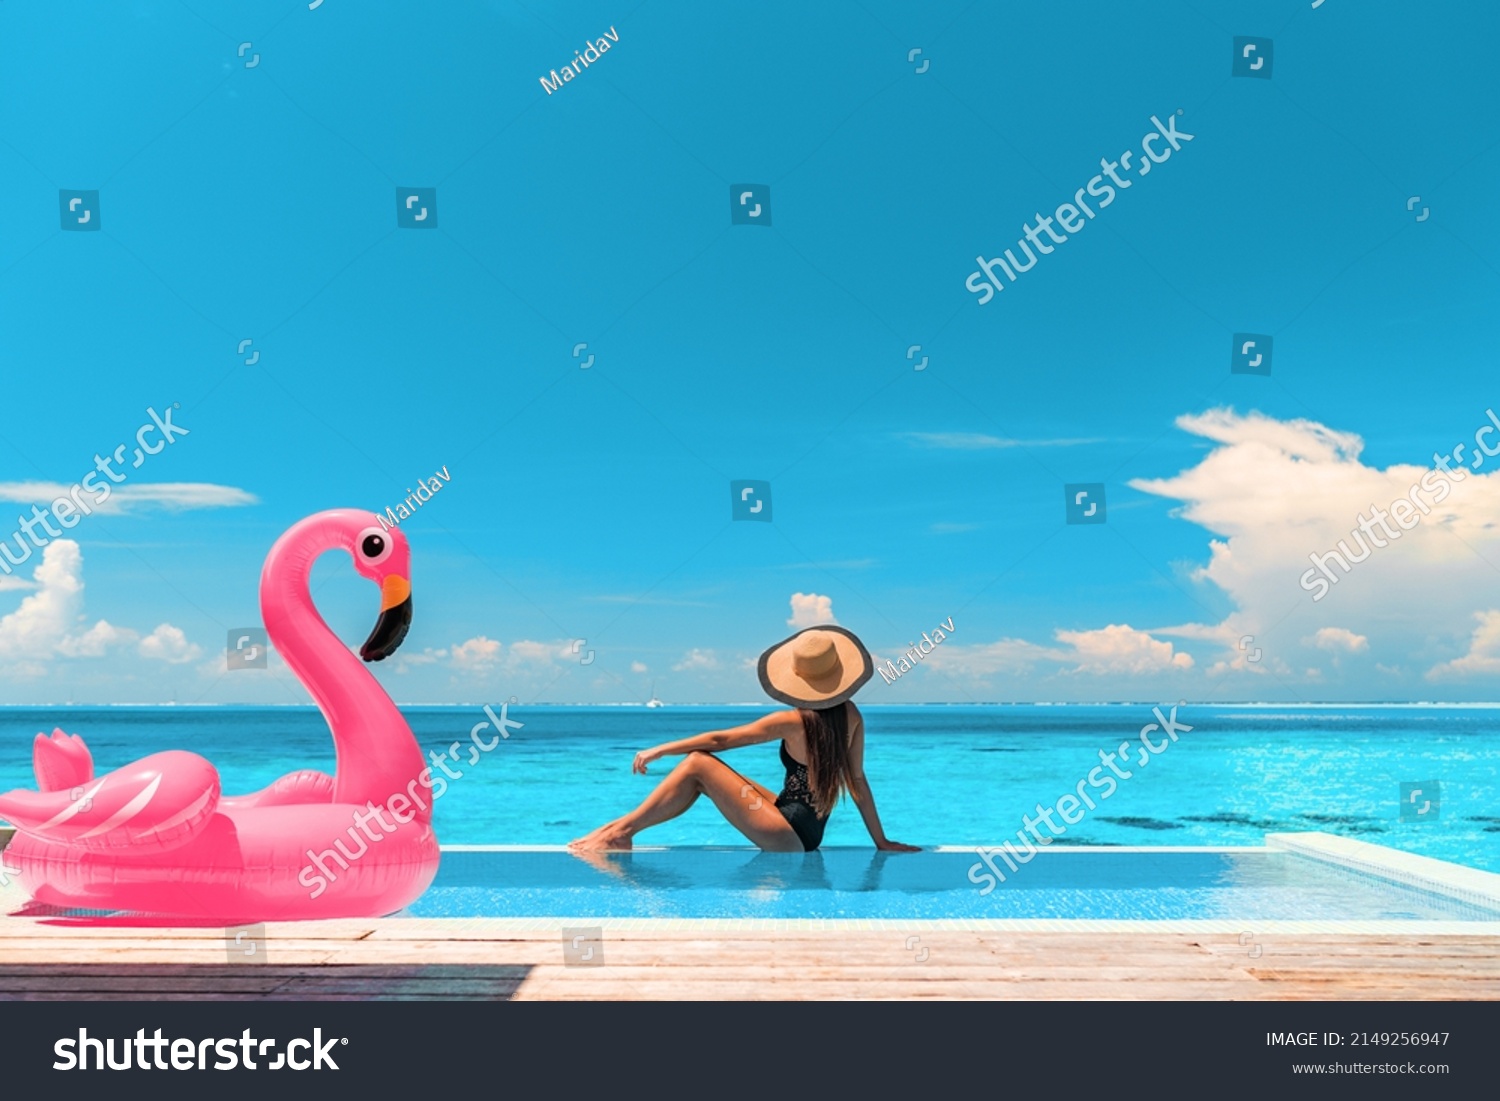 Travel on beach by pool on summer vacation in luxury resort. Woman relaxing in bikini by inflatable pink flamingo toy pool float on ocean turquoise background. Holiday travel destination concept. #2149256947